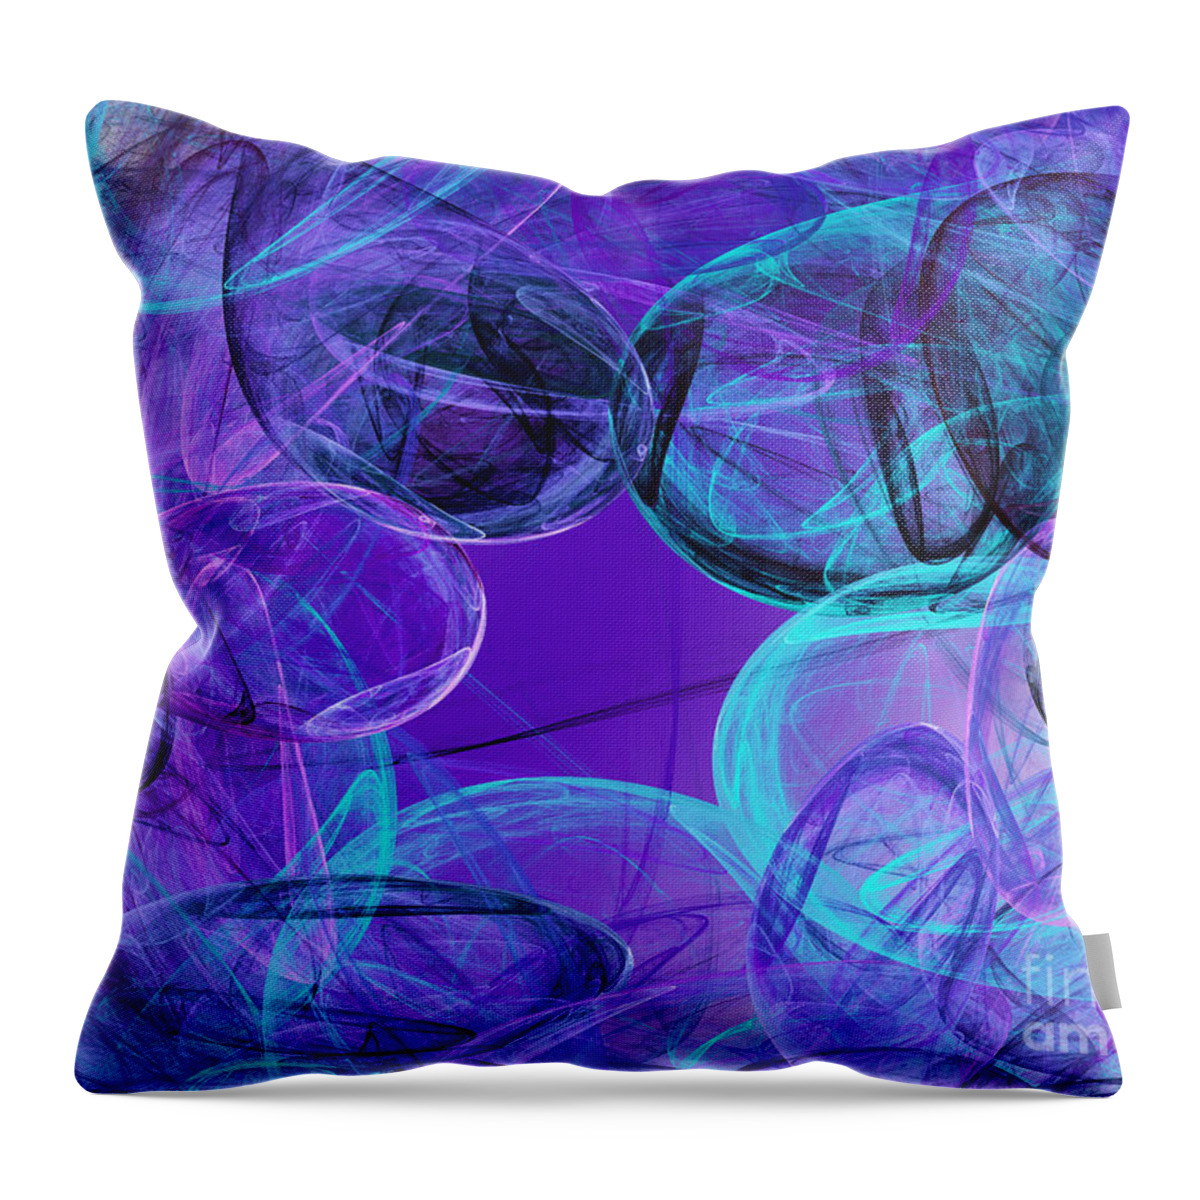 Abstract Throw Pillow featuring the digital art Amethyst Gems Stones by Andee Design